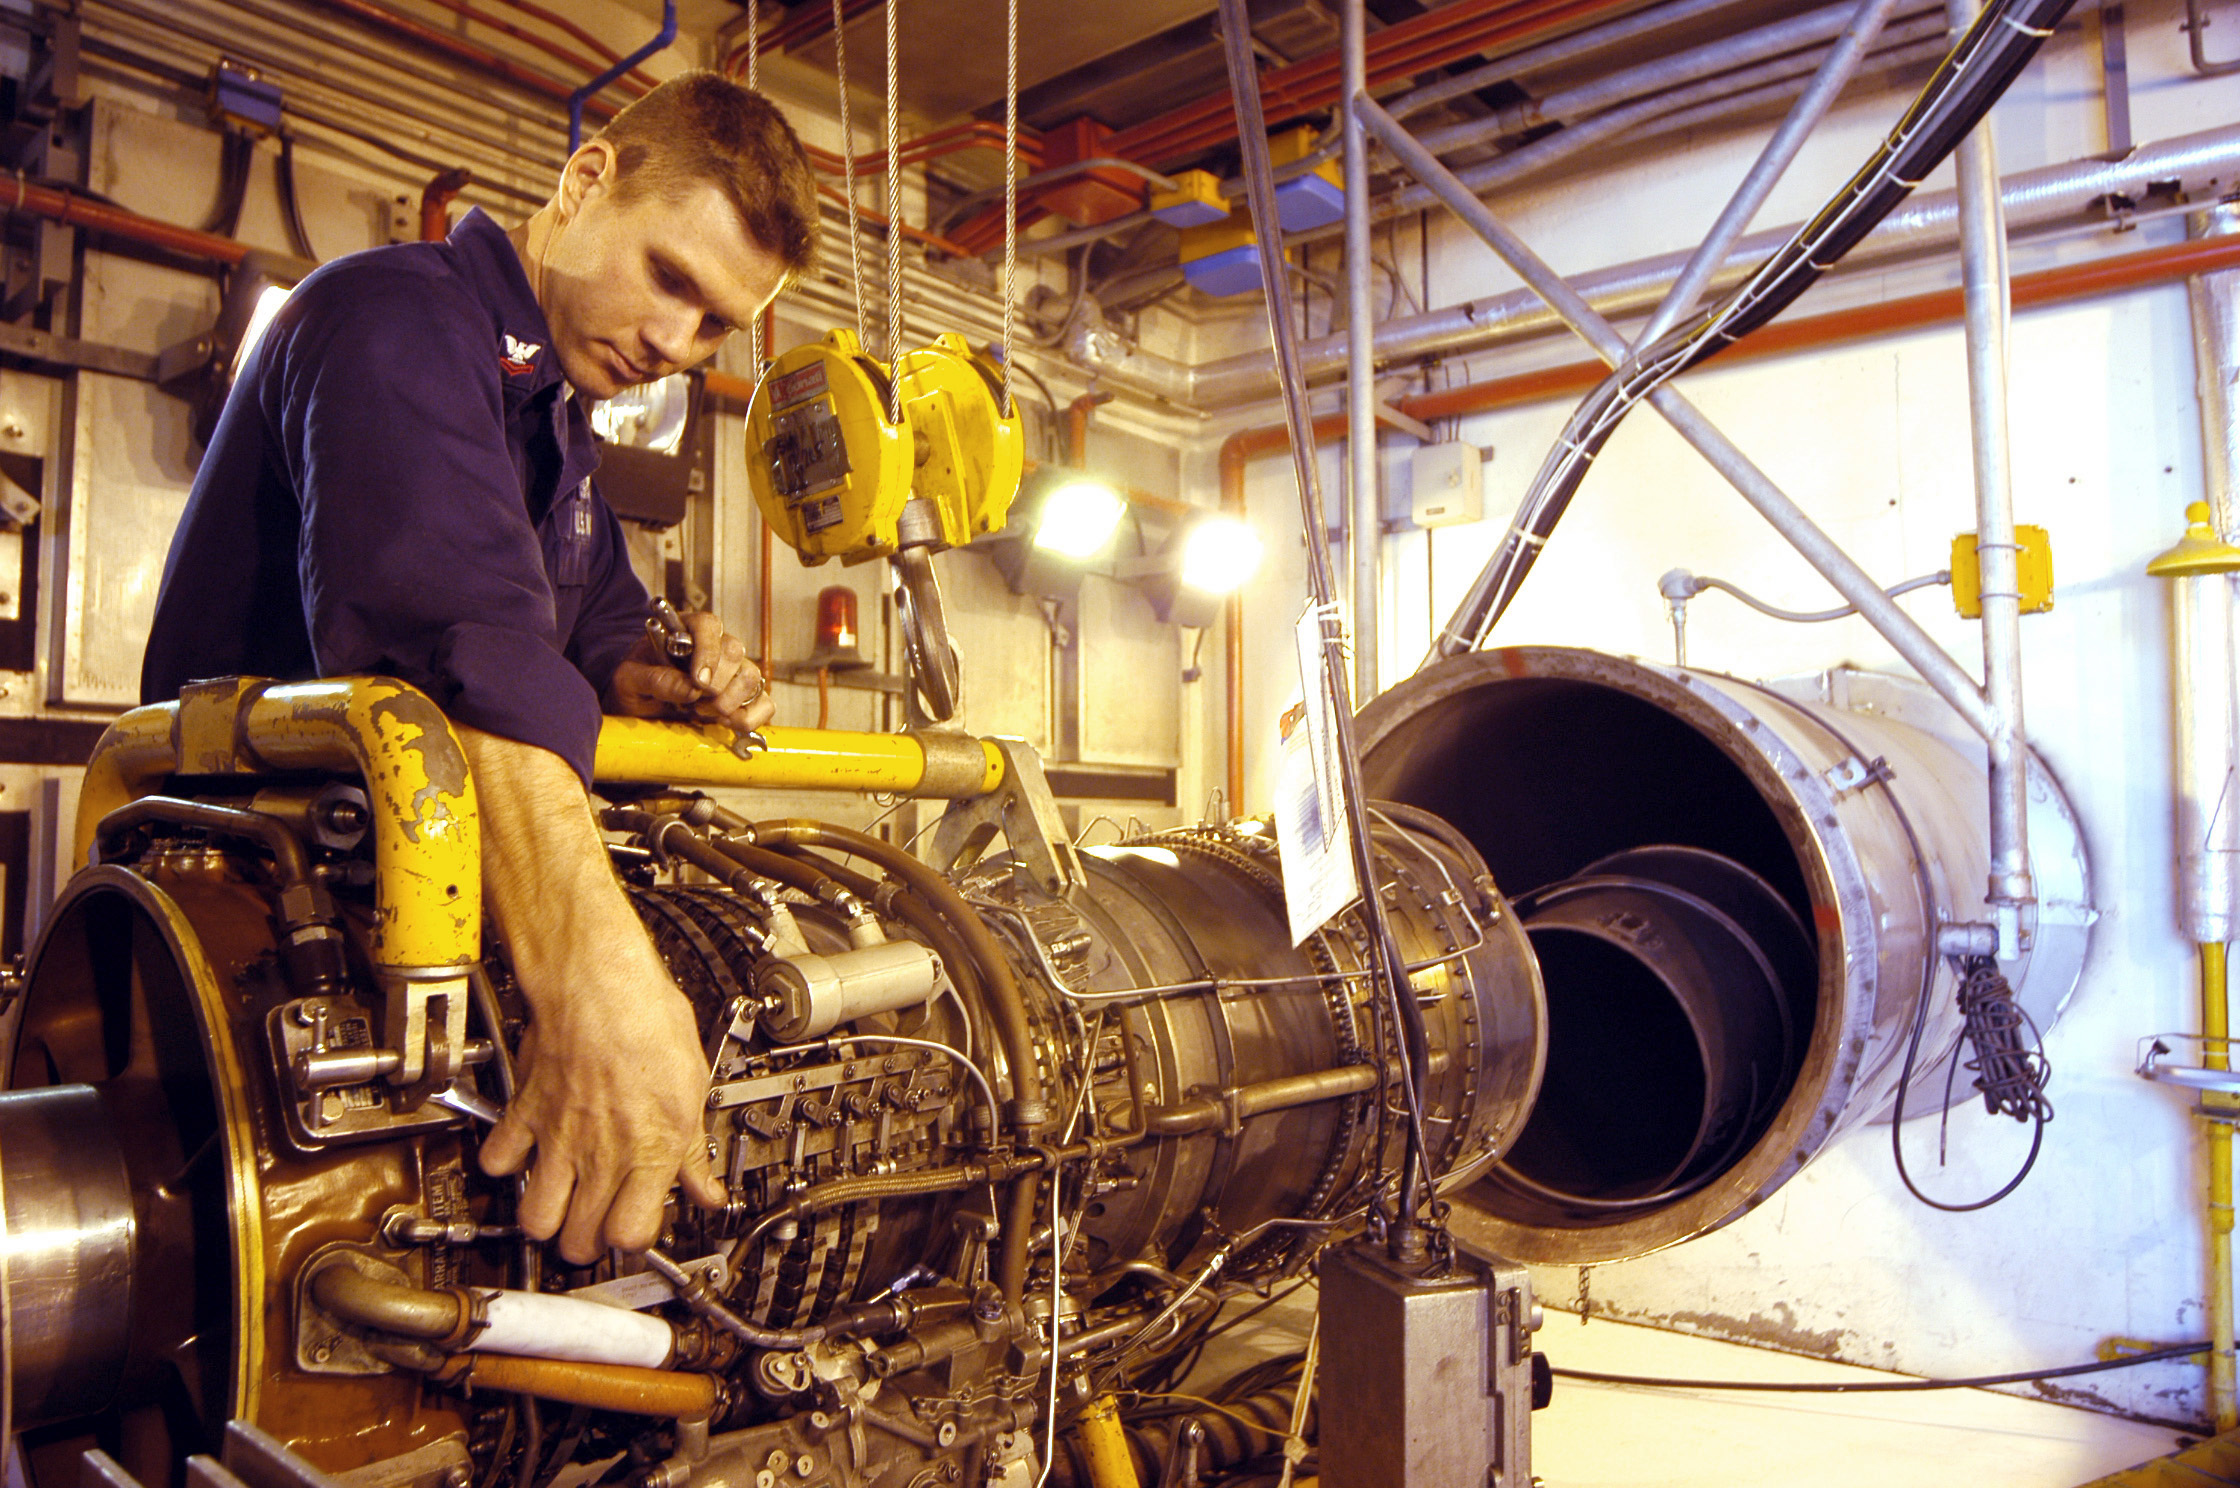 US Navy 030321-N-9693M-006 Aviation Machinist's Mate 2nd Class David Lyman, left, tightens a fitting on a T-64 turbo shaft engine for an MH-53E 'Sea Dragon' helicopter